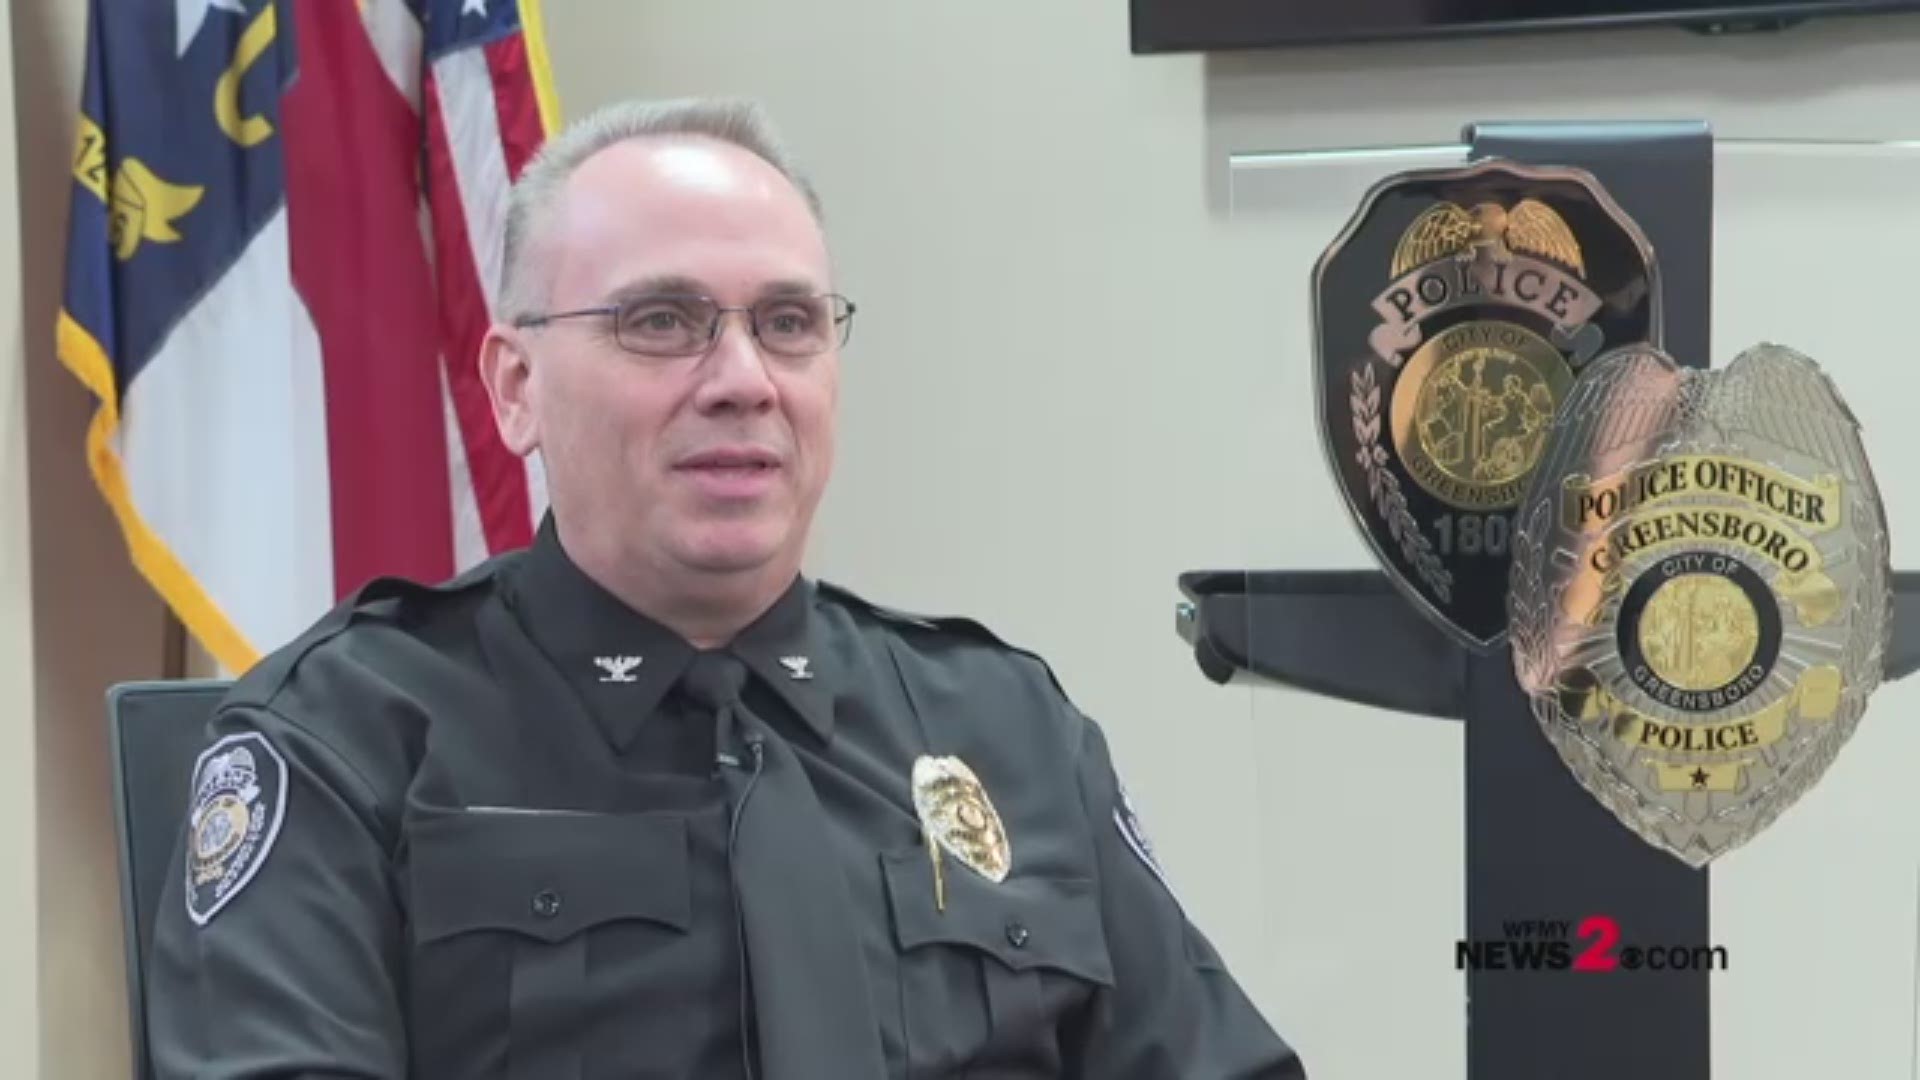 We talk to Greensboro Police Chief Wayne Scott on retirement and his plans moving forward.